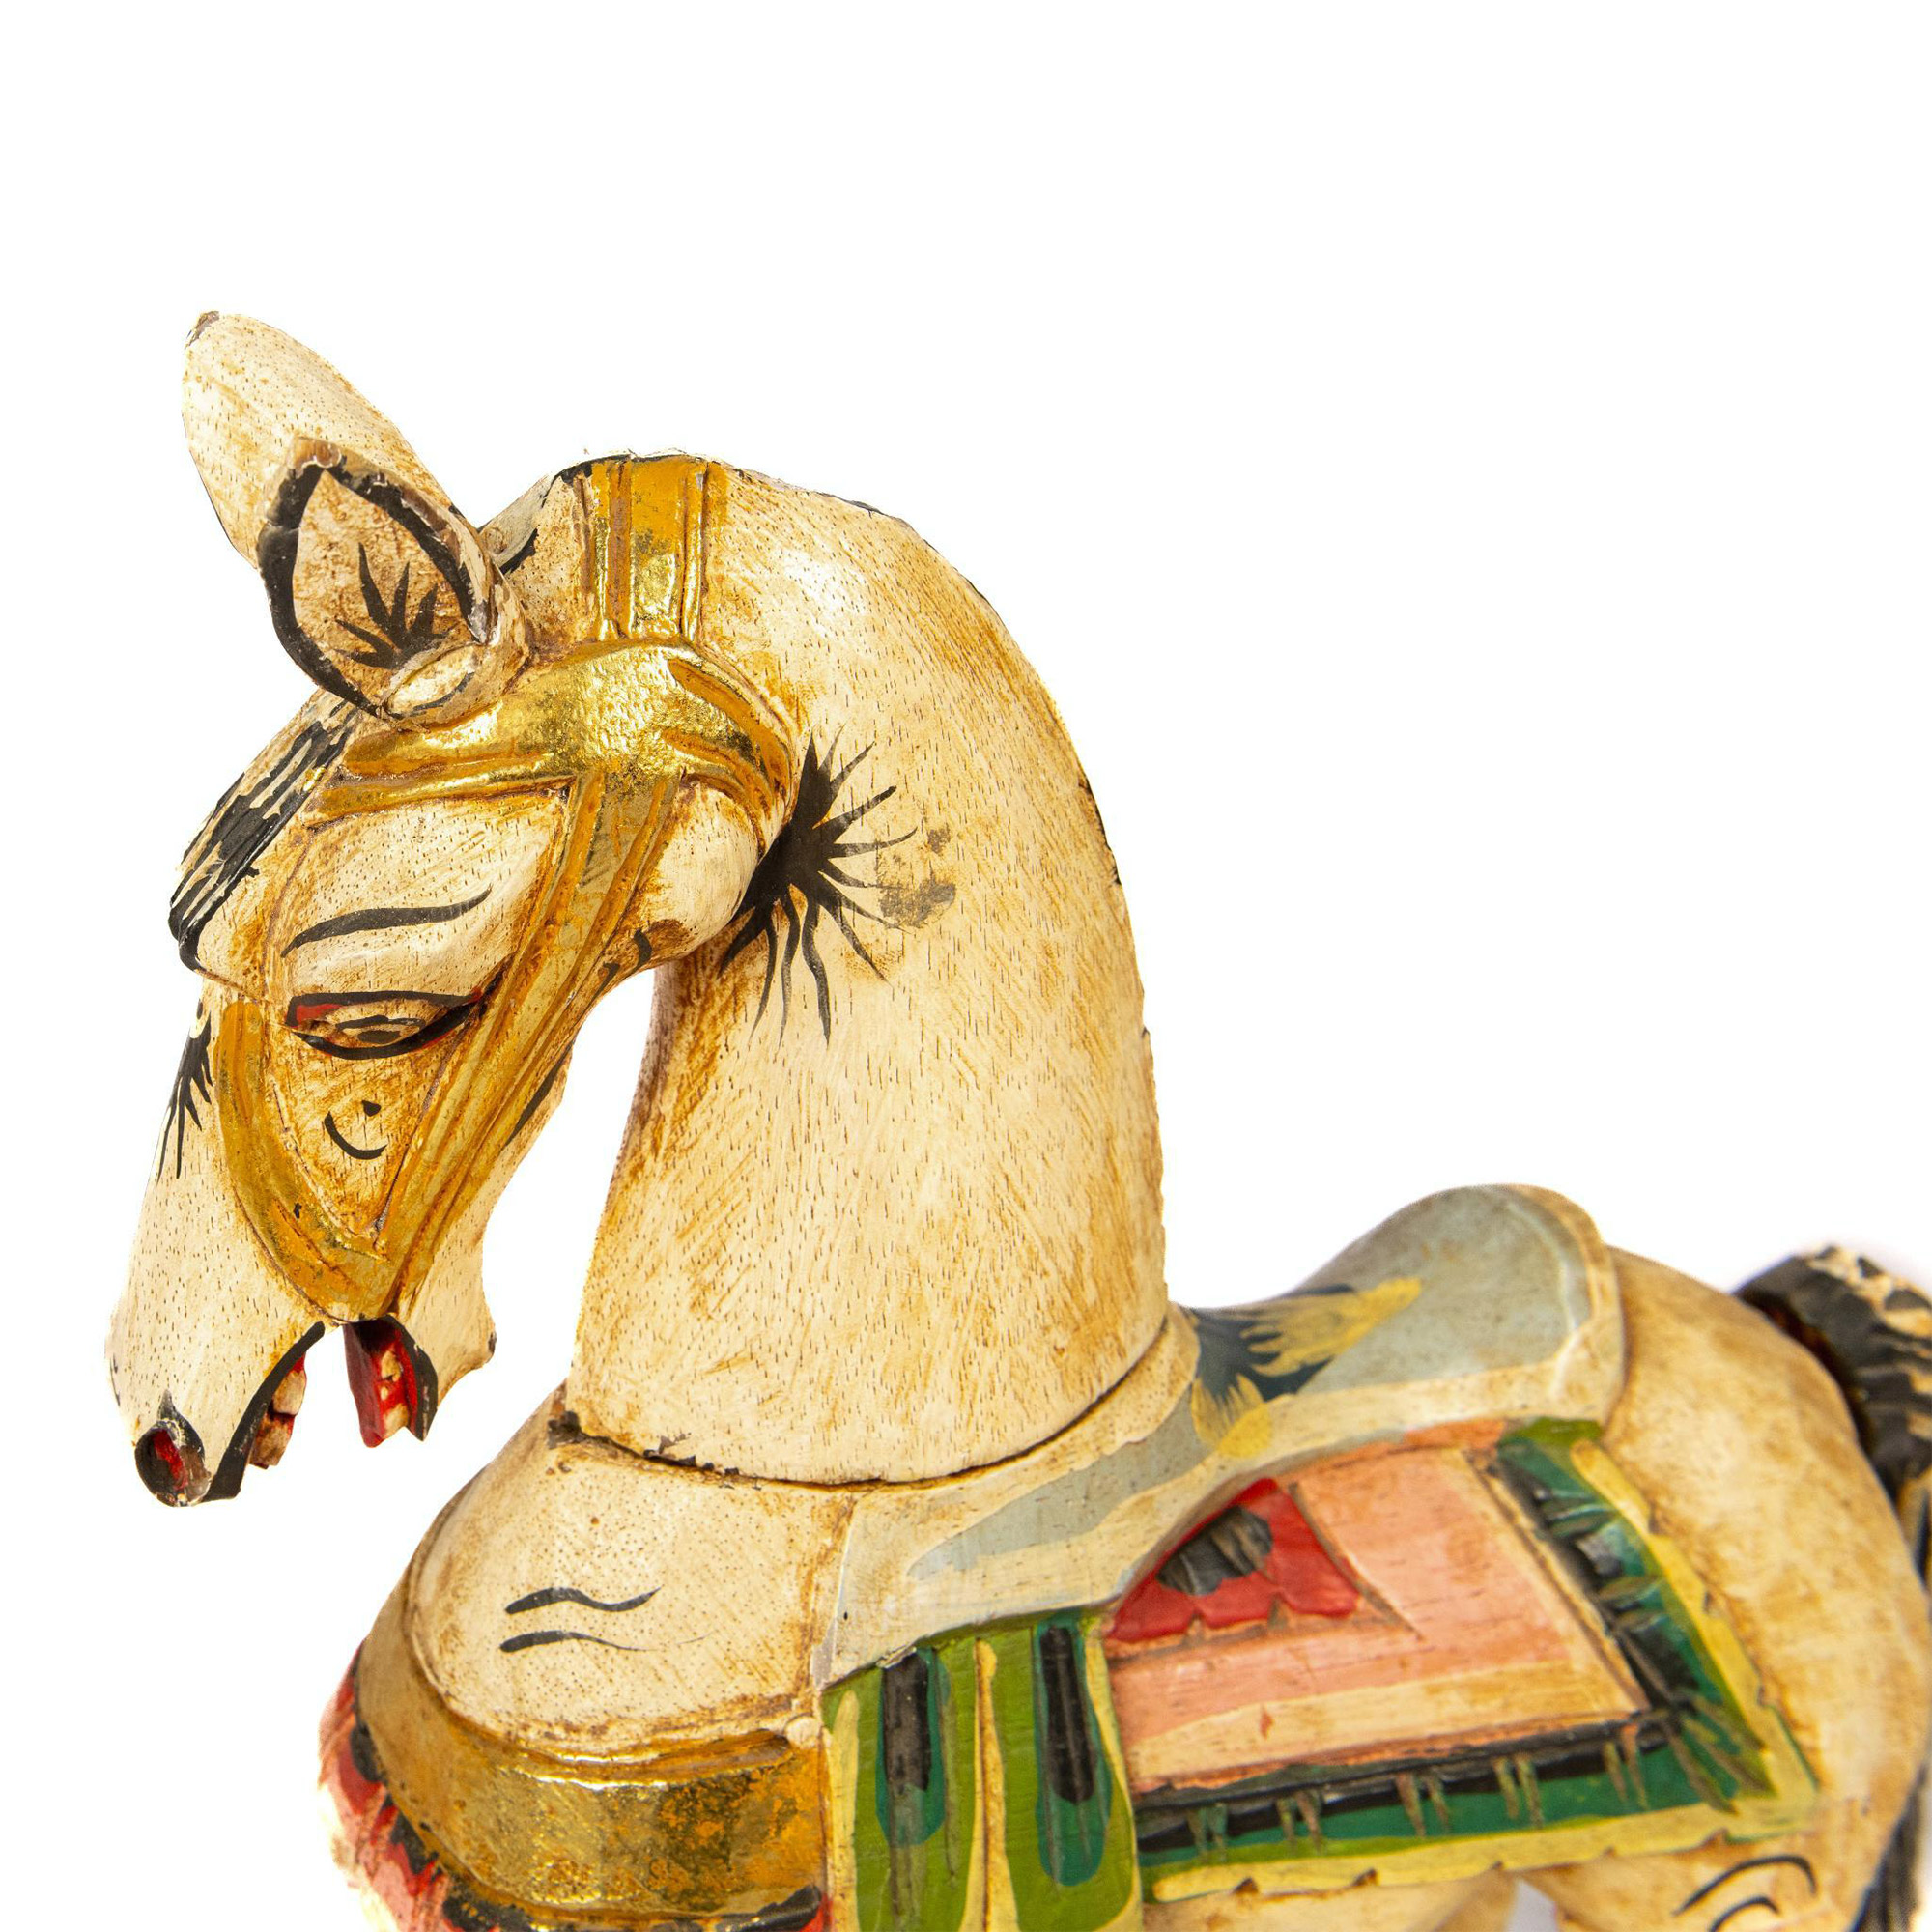 Small Decorative Wooden Carousel Rocking Horse - Image 3 of 6